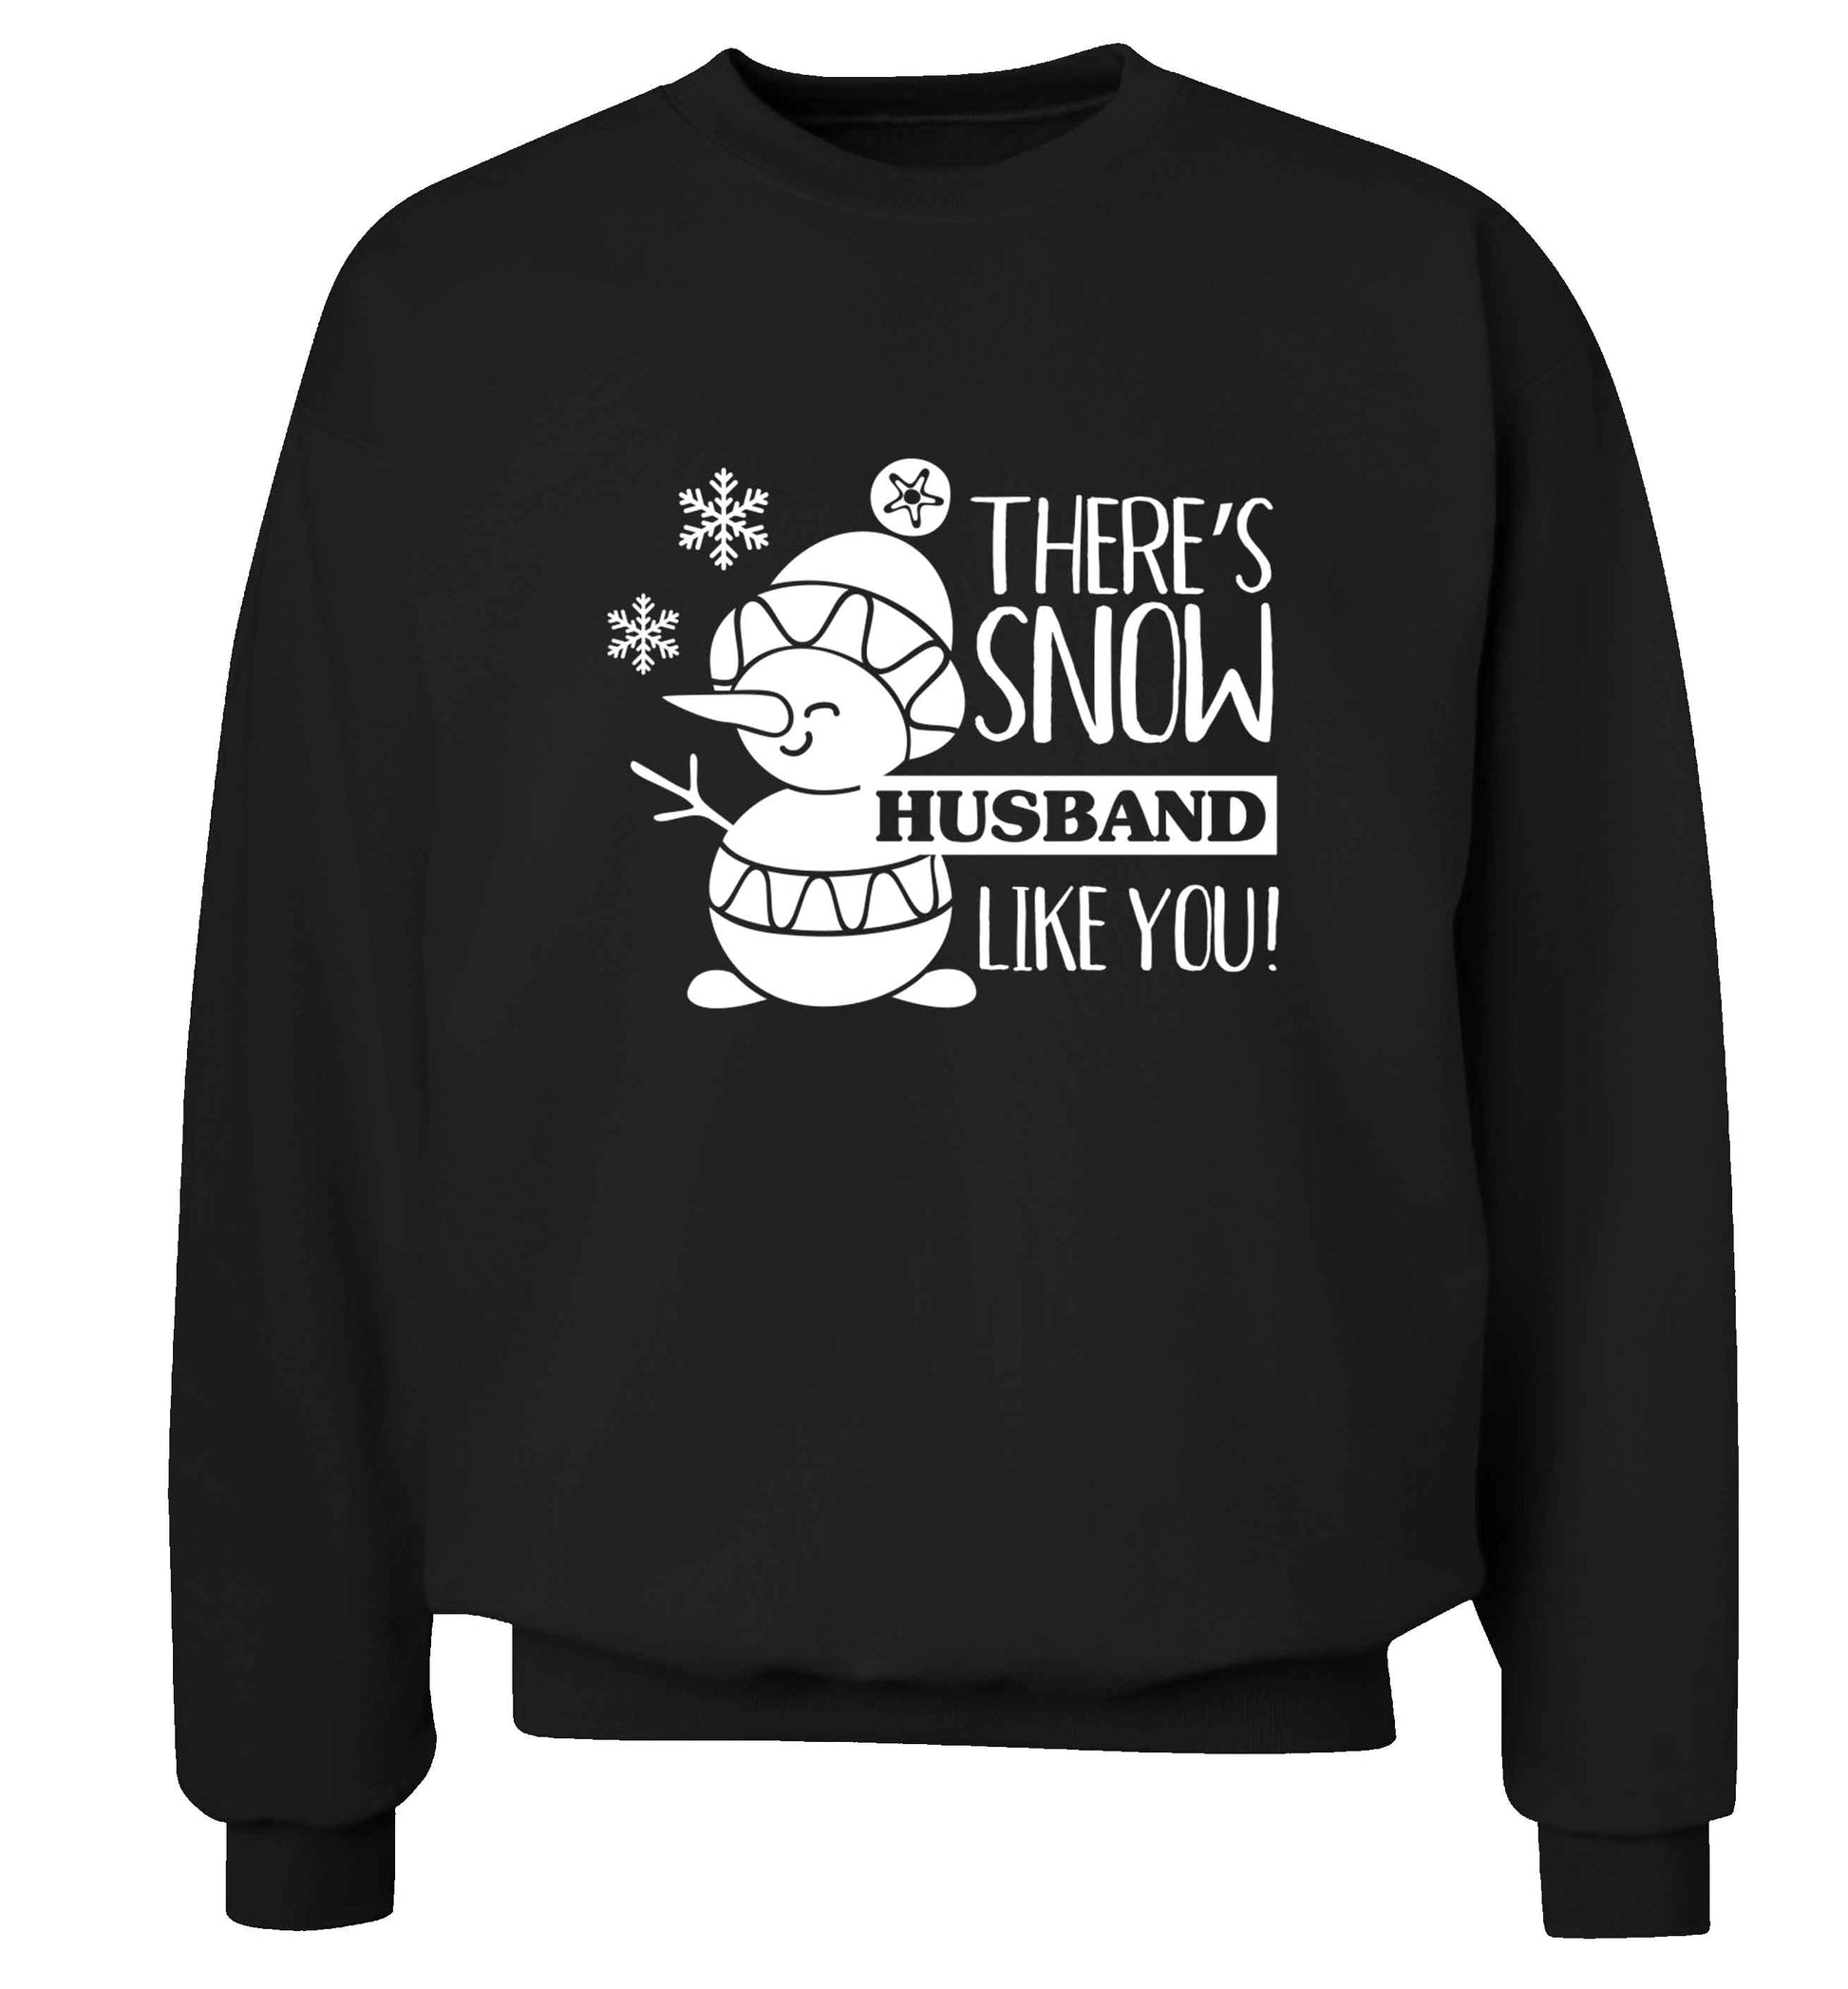 There's snow husband like you adult's unisex black sweater 2XL